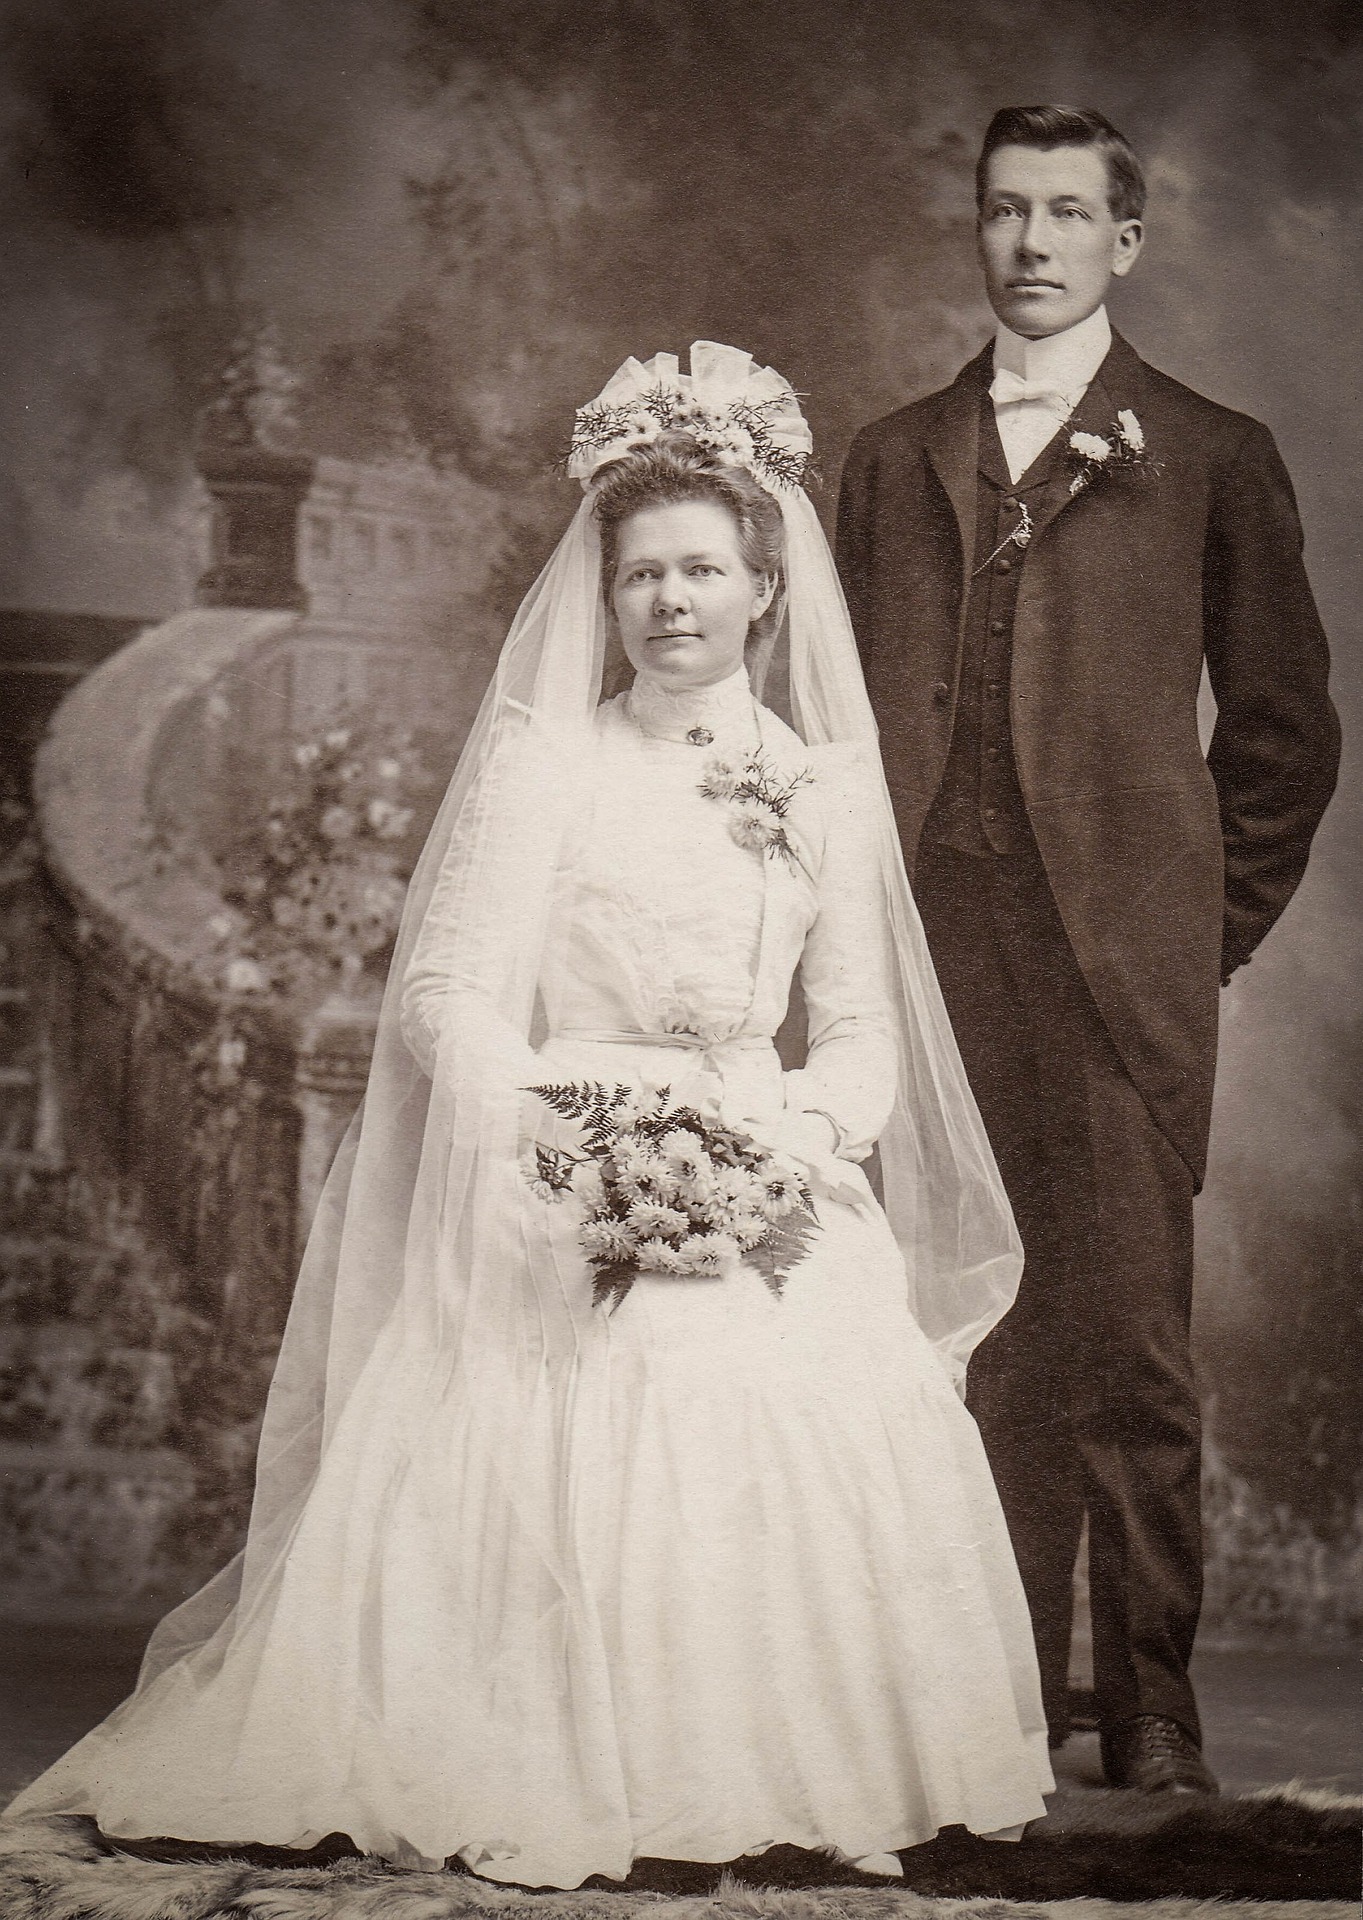 A vintage photograph of a bride and groom.